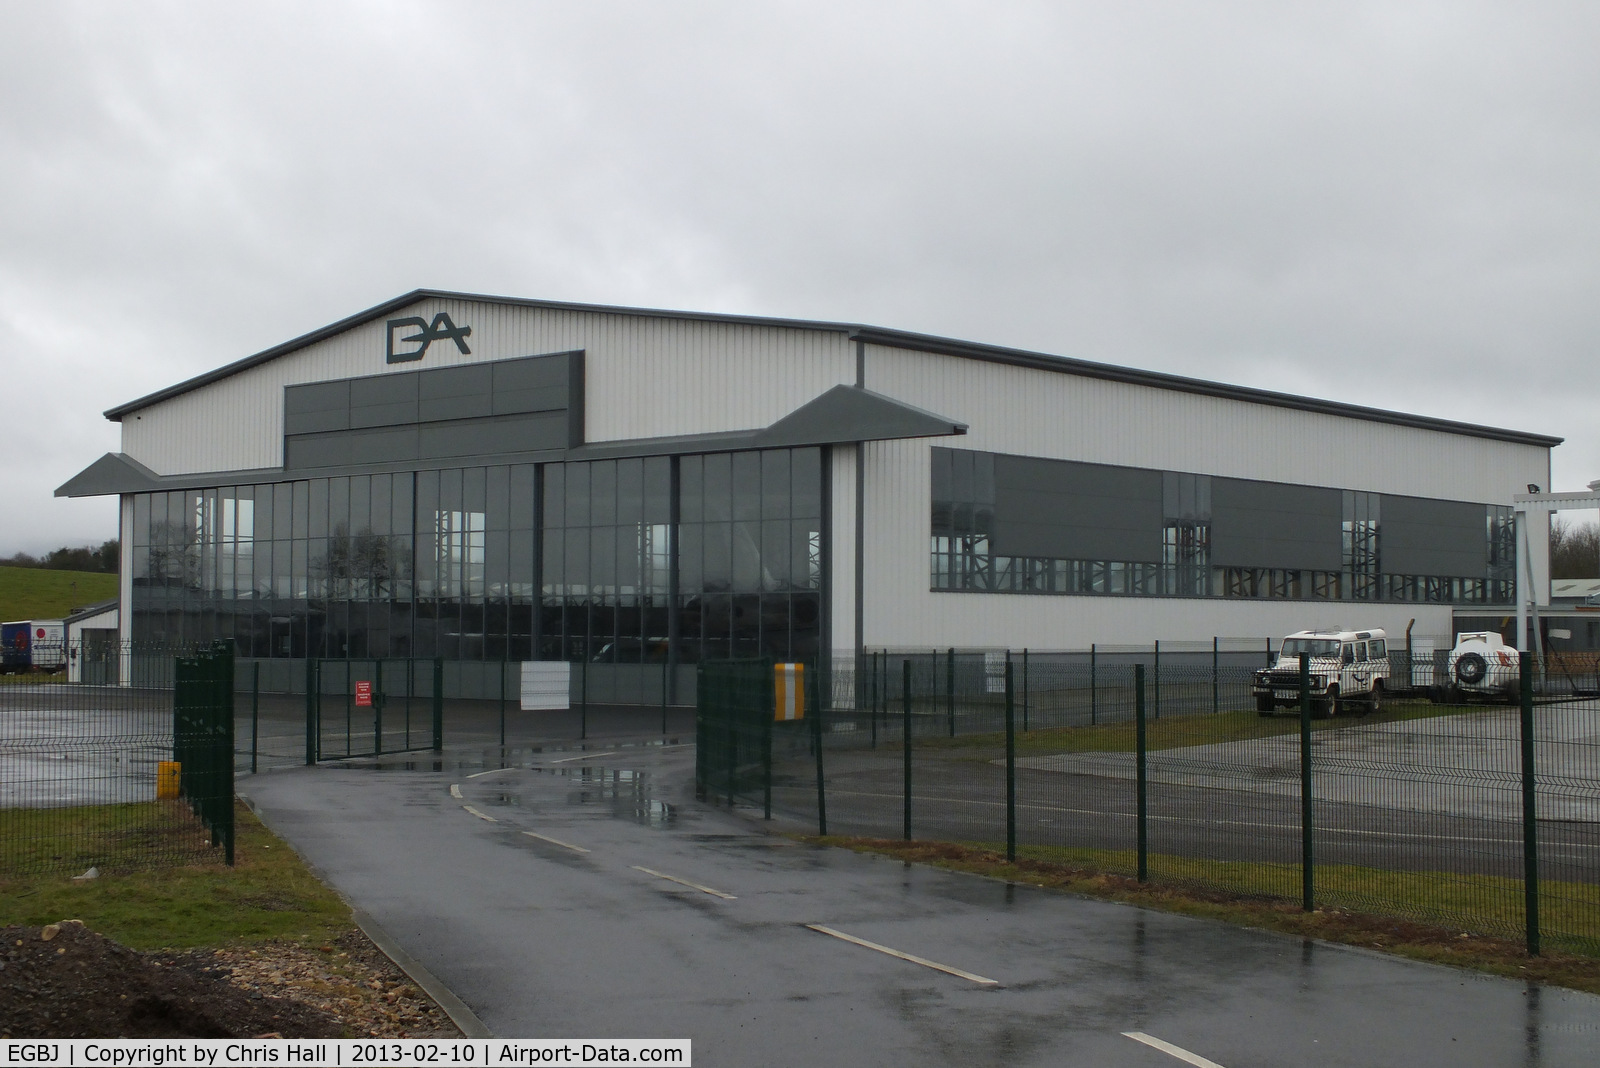 Gloucestershire Airport, Staverton, England United Kingdom (EGBJ) - Hangar SE3, which was once used by the historic Gloster Aircraft Company for storage, now fully restored 70 years after it was built.